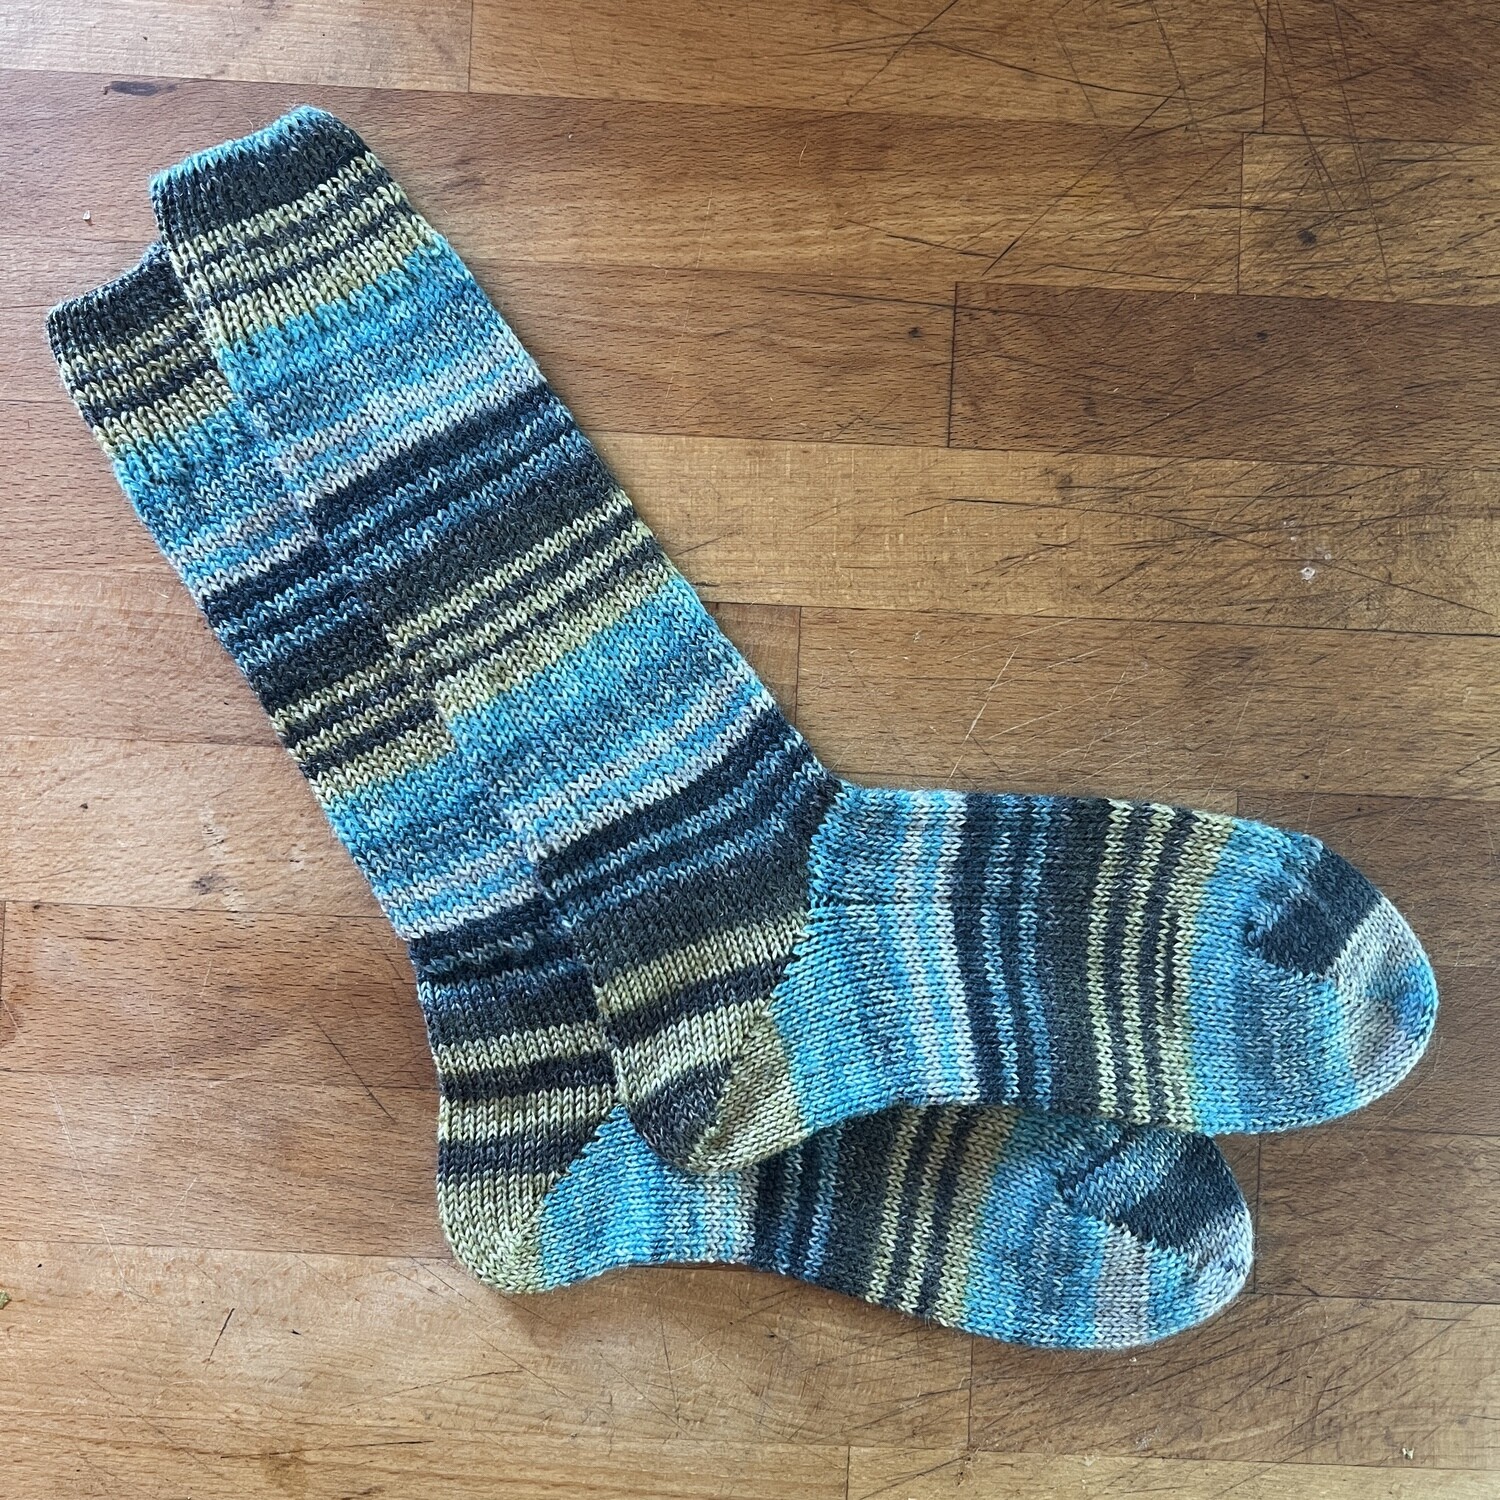 Woman's Crew Sock Size 11 - 12 Edenderry - Teal, Green, Gray